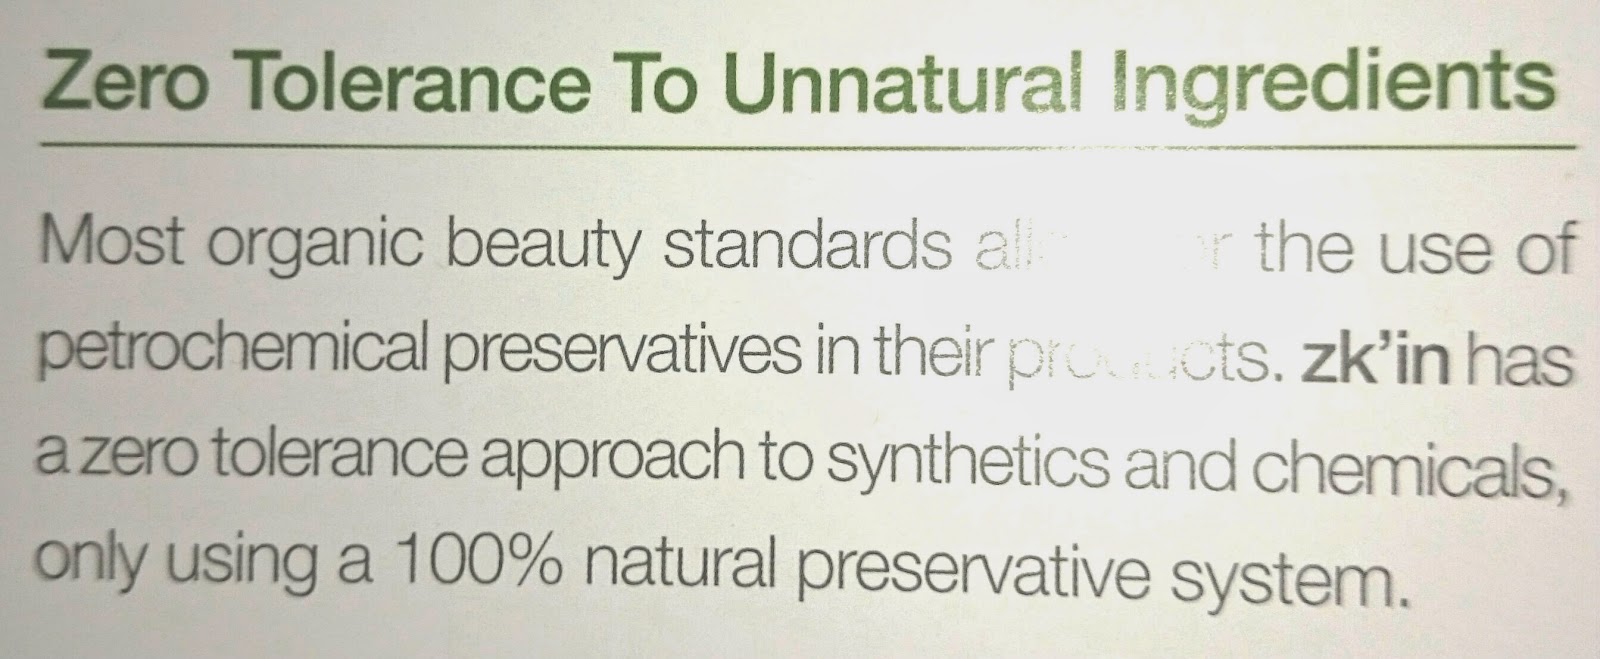 Zero Tolerance To Unnatural Ingredients. Most organic beauty standards allow for the use of petrochemical preservatives in their products, zk'in has a zero tolerance approach to synthetics and chemicals, only using a 100% natural preservative system.